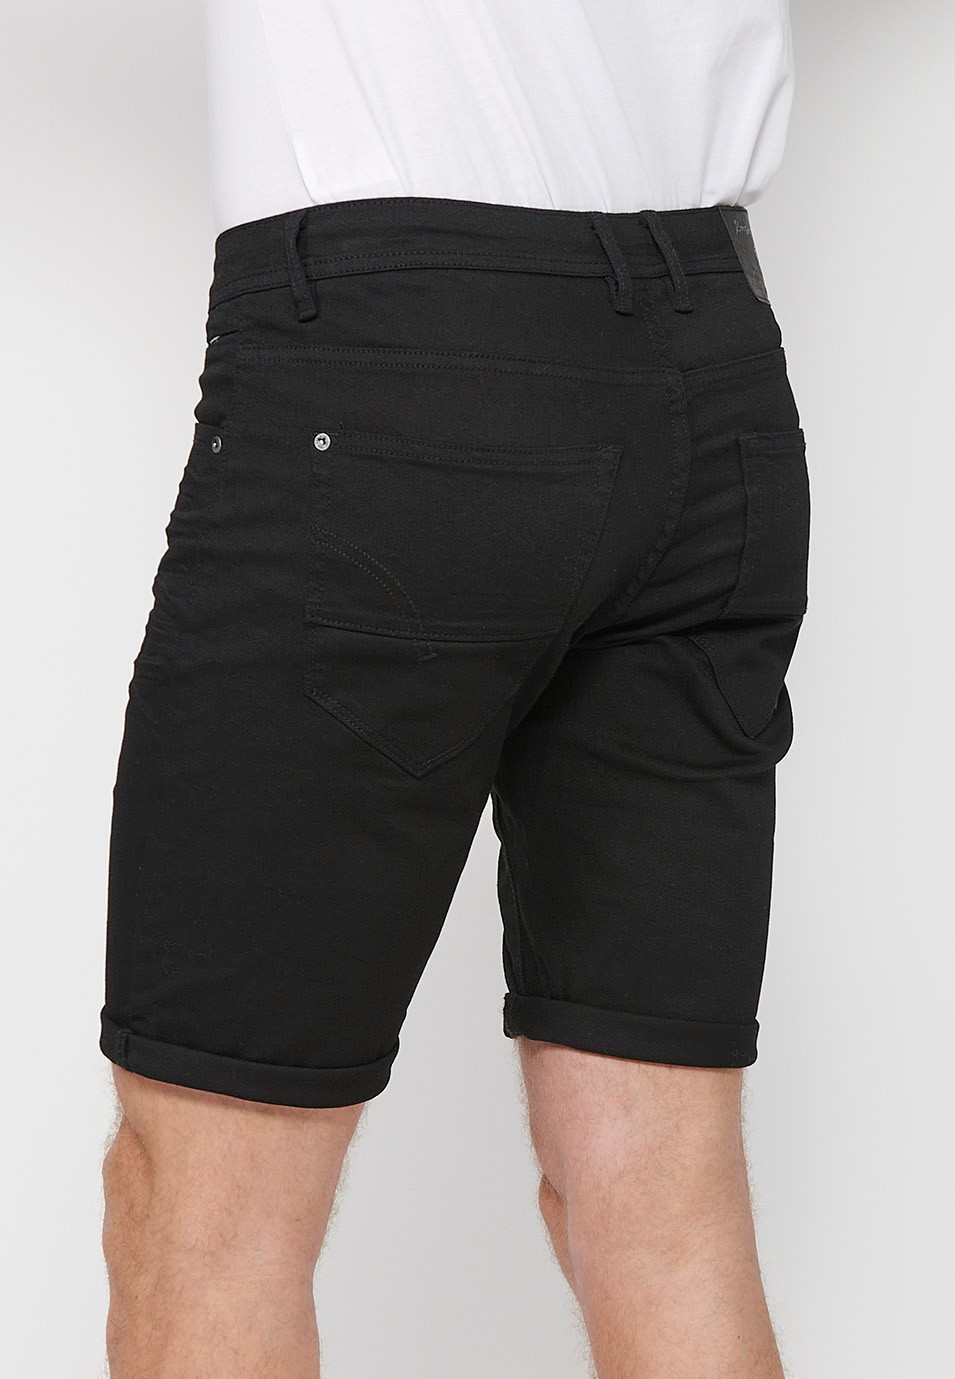 Denim Bermuda shorts with cuffed finish and front zipper and button closure. Five pockets, one black color pocket for men 6